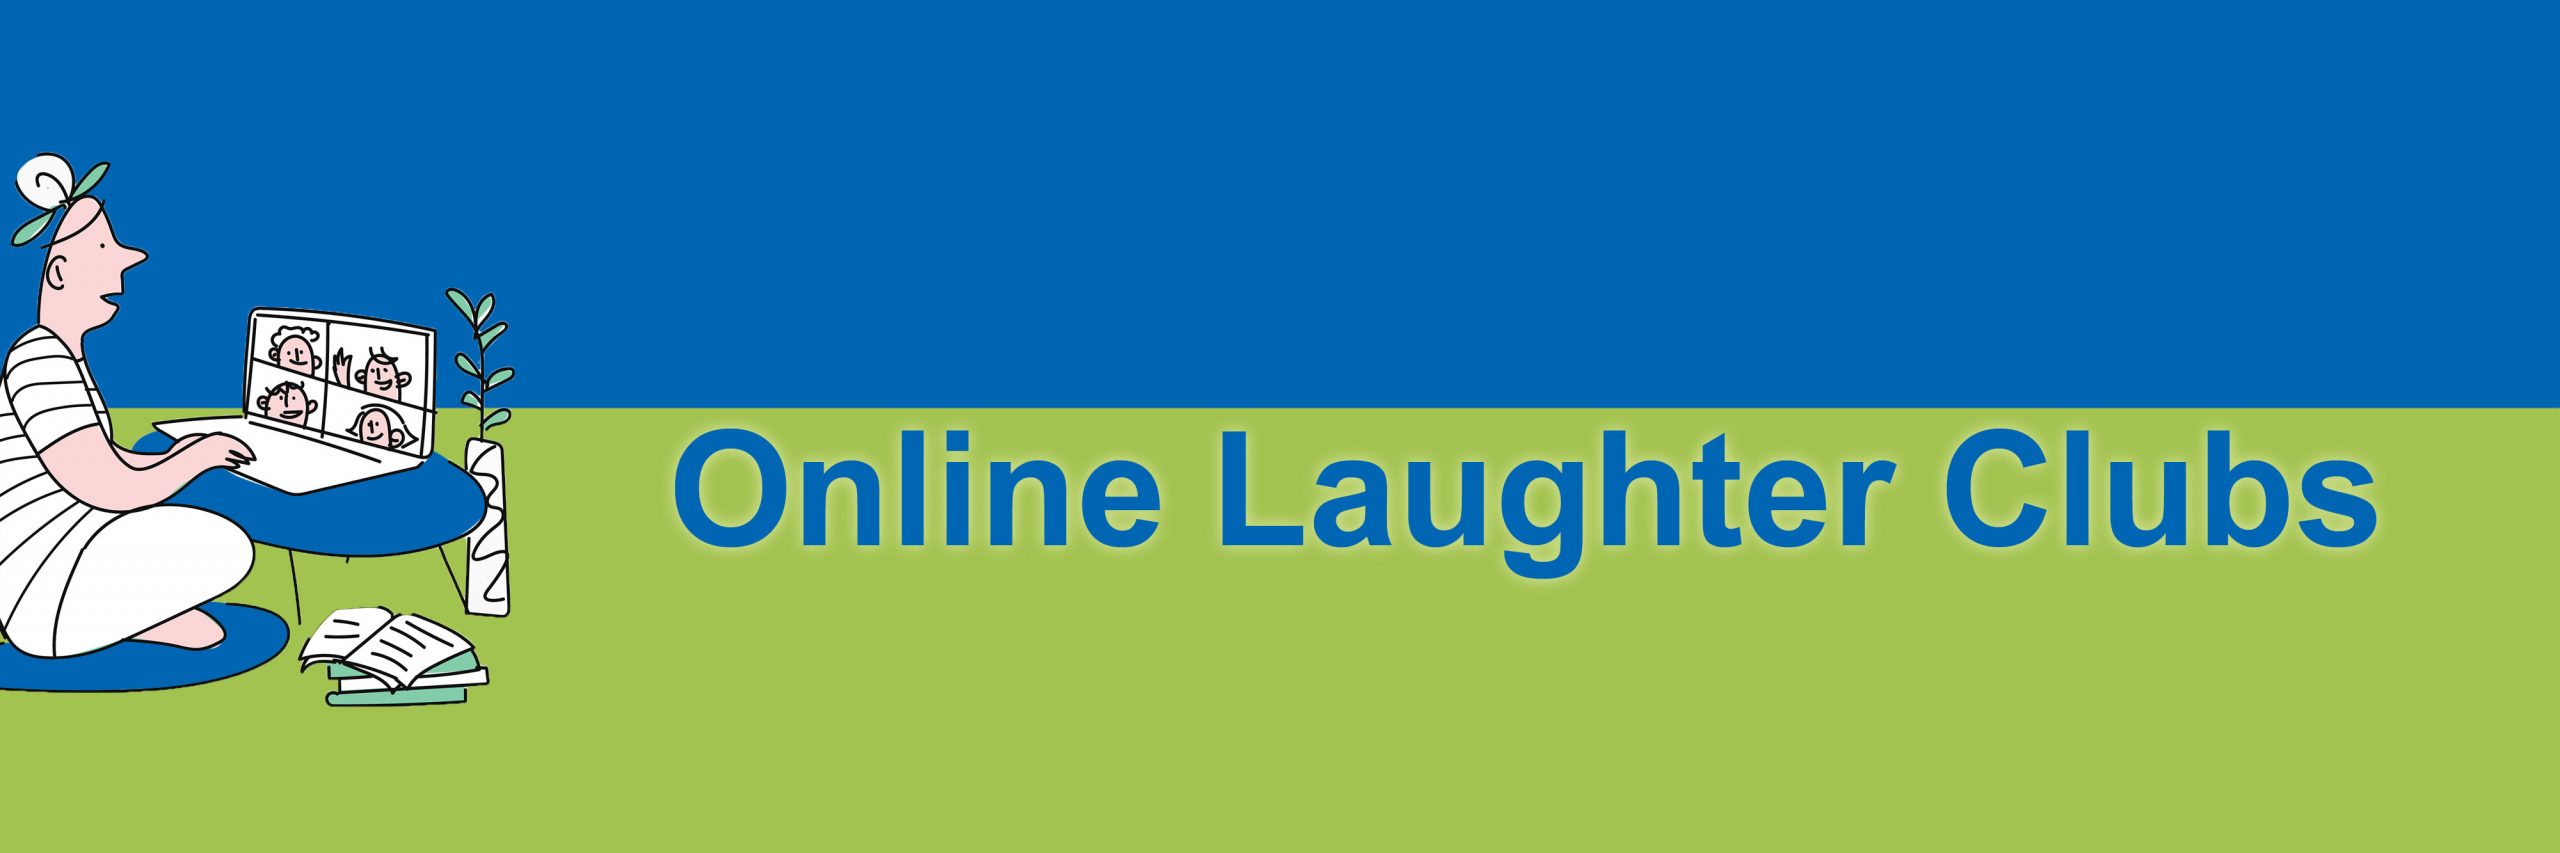 Online Laughter Clubs